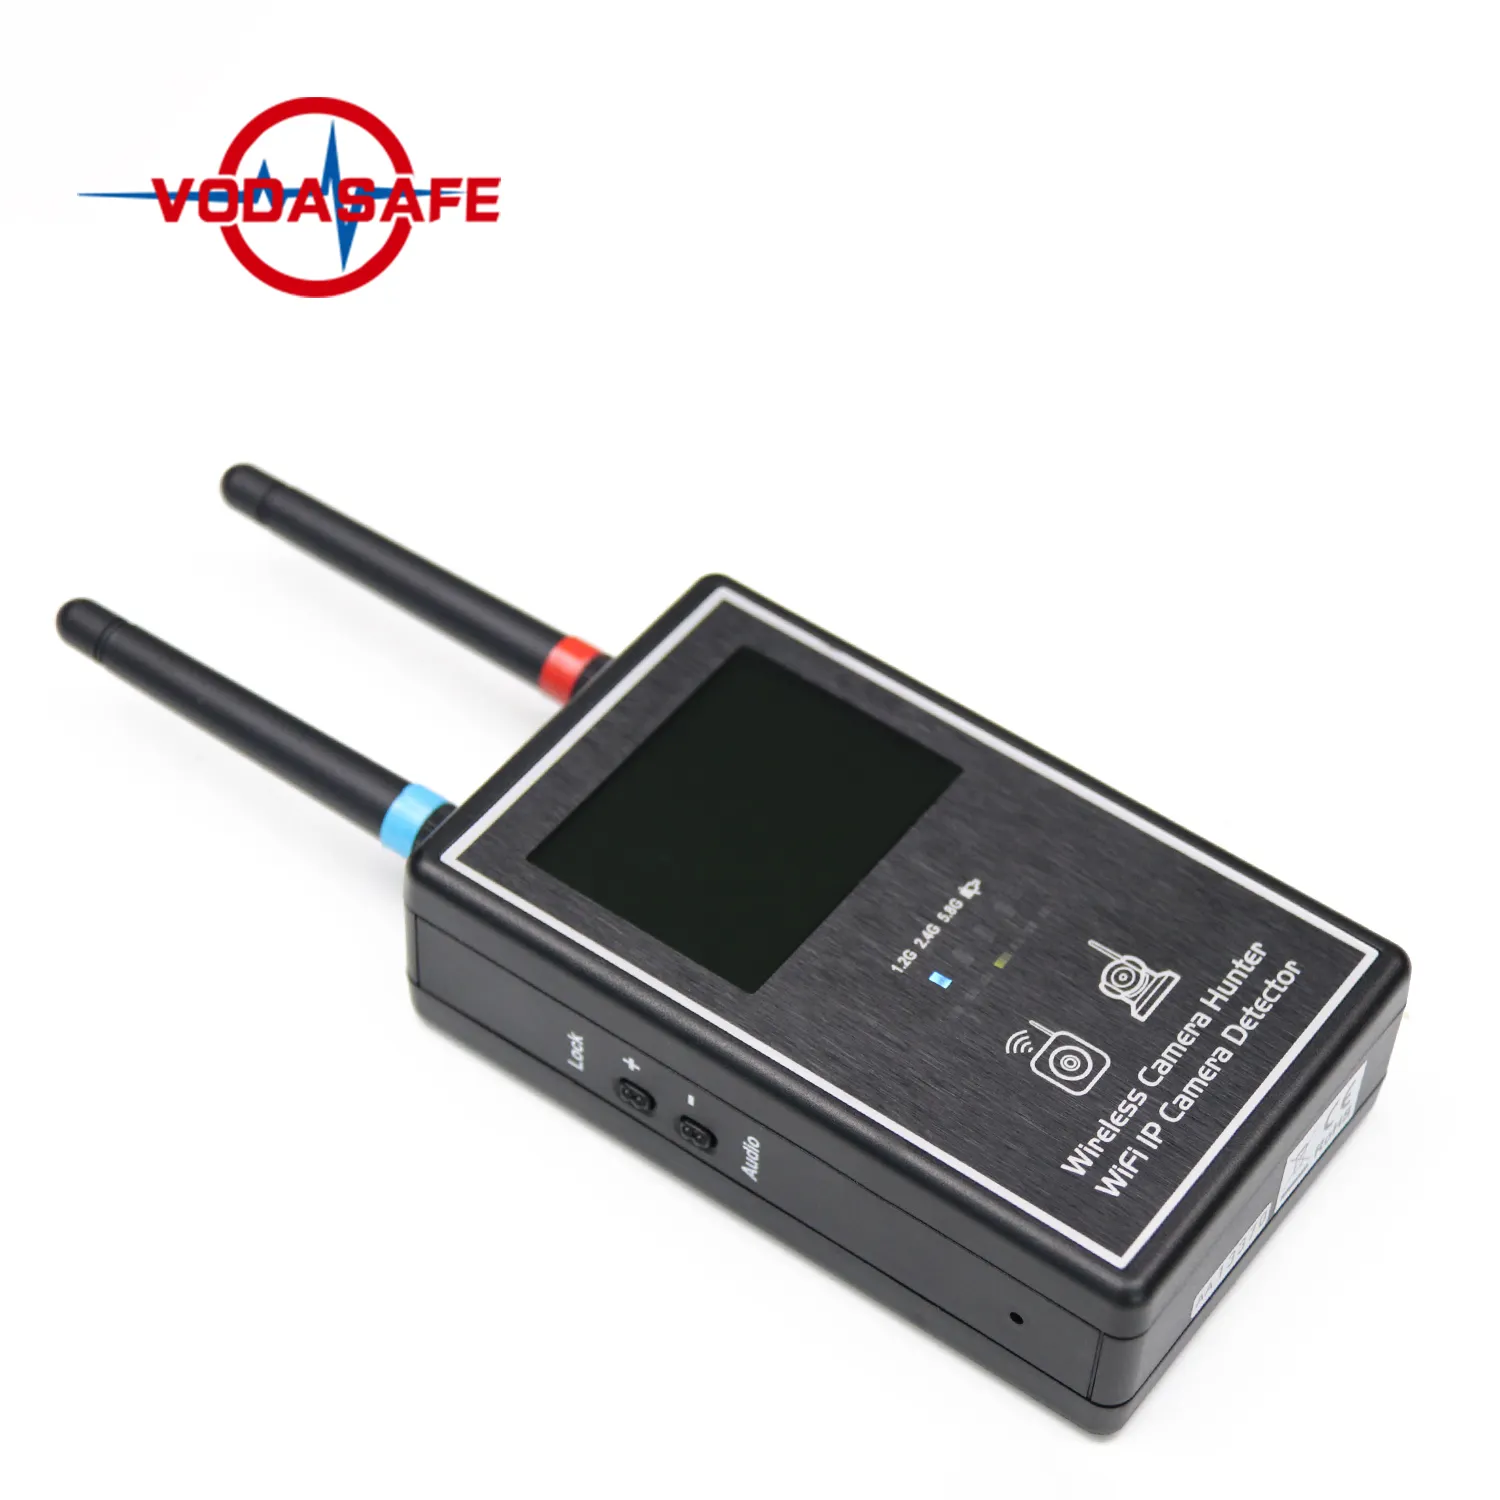 Vodasafe Professional Full-Band WiFi Camera Detector IP Network Scanner for Private Investigators and Security Professionals